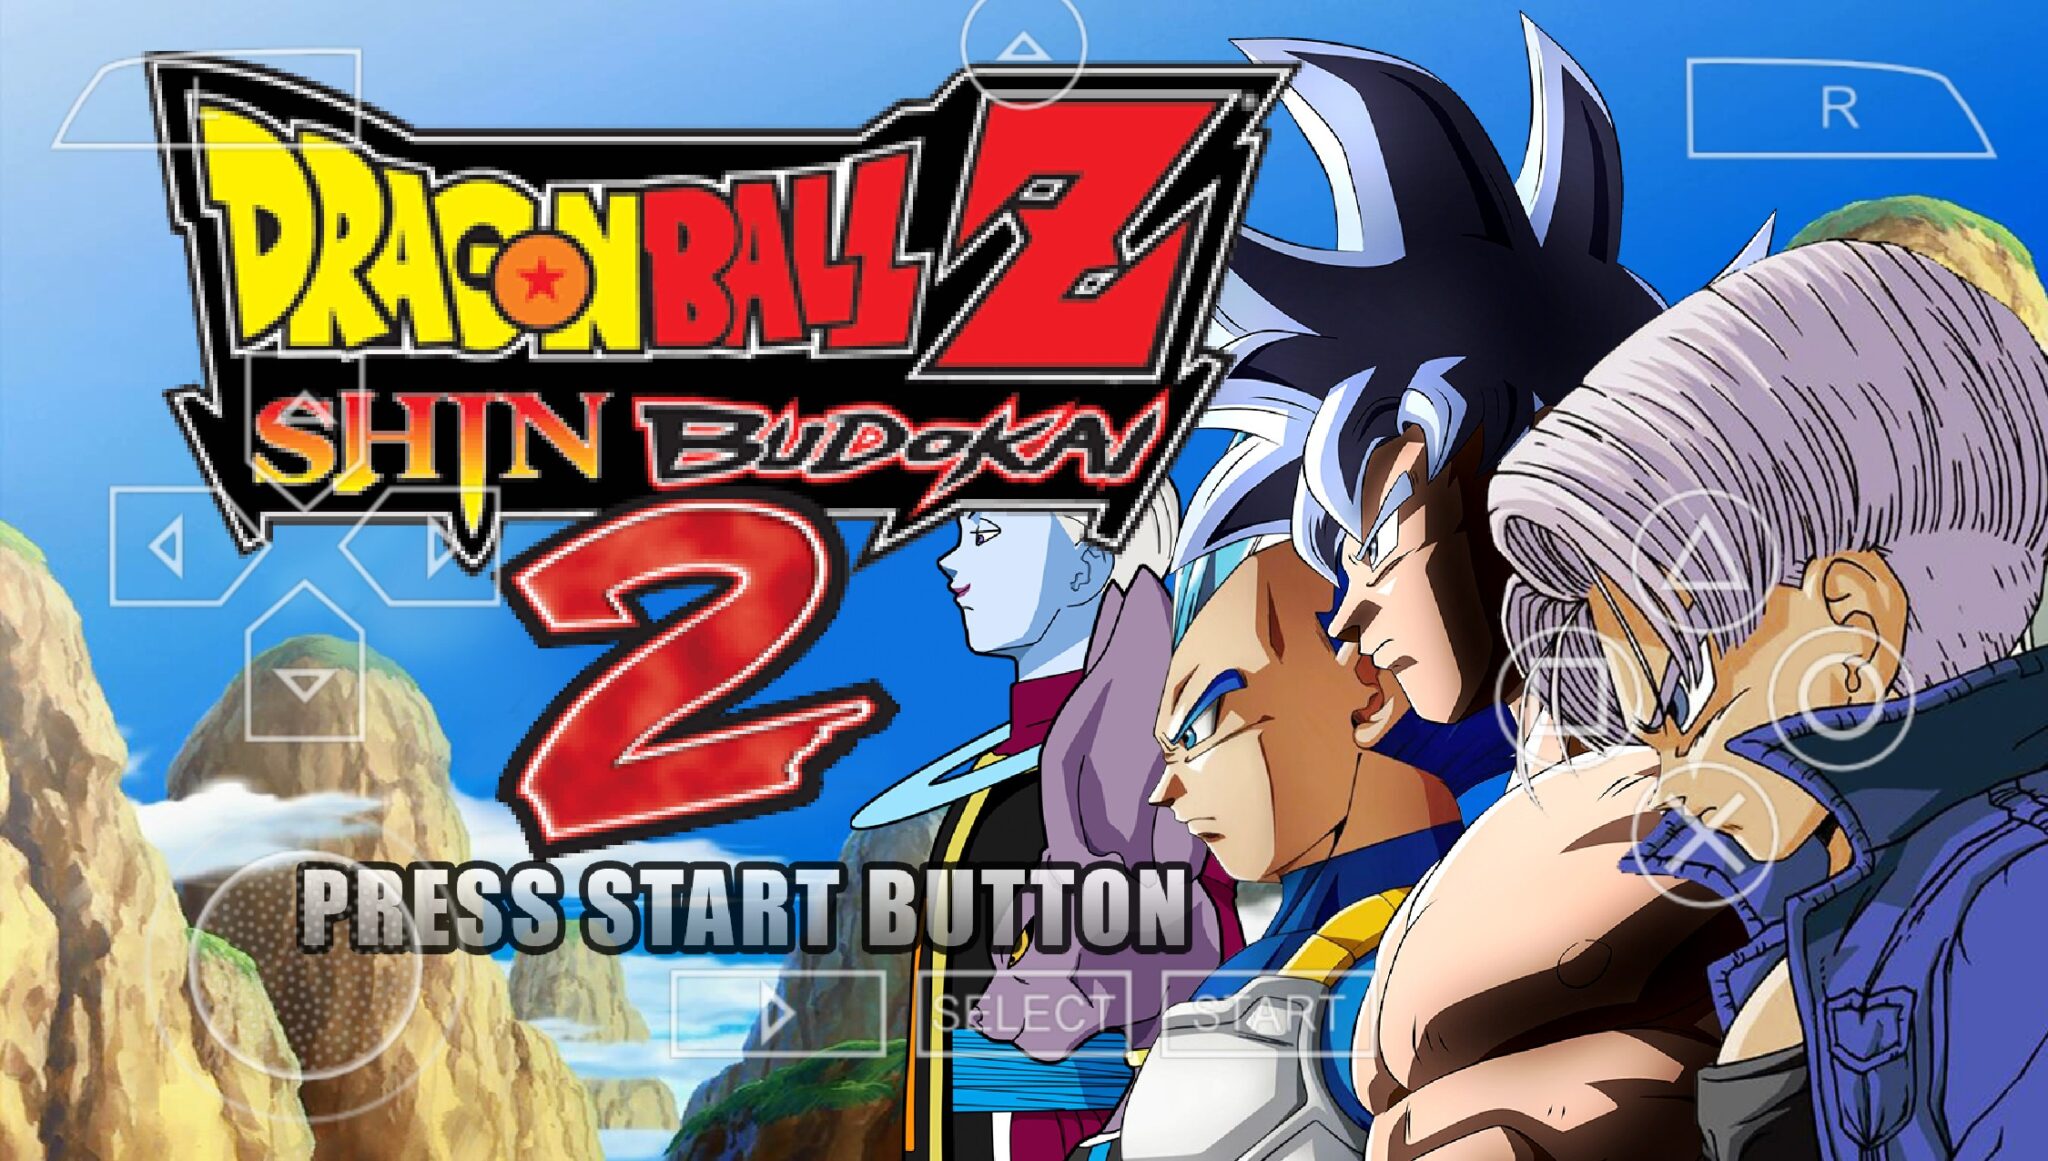 Dragon Ball Z Shin Budokai 2 PPSSPP ISO Zip File Download Highly Compressed